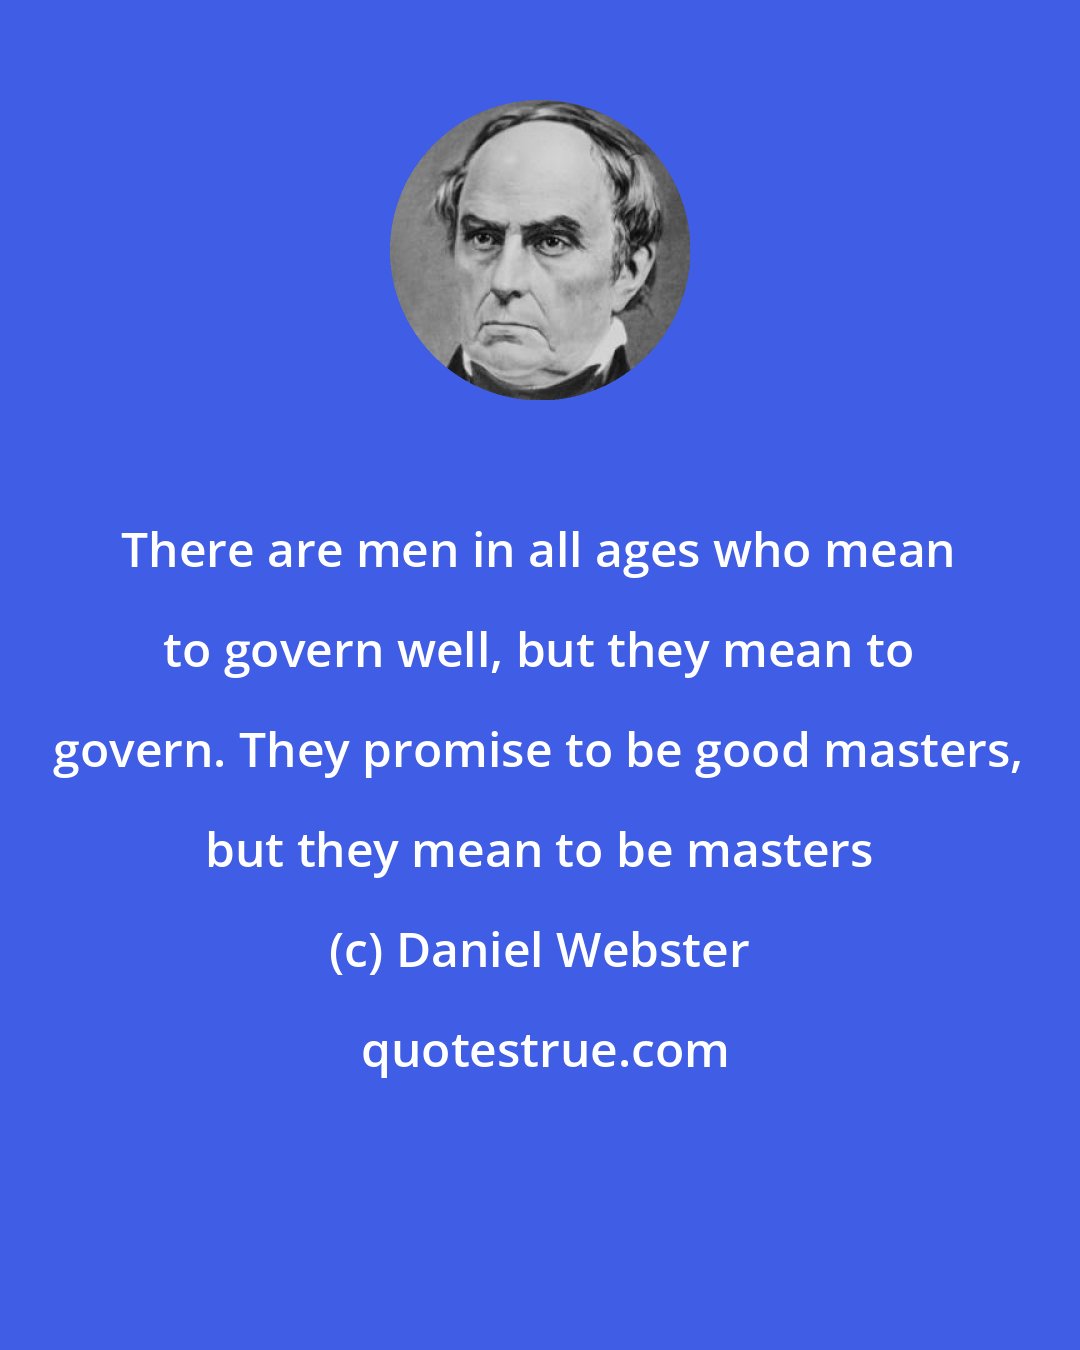 Daniel Webster: There are men in all ages who mean to govern well, but they mean to govern. They promise to be good masters, but they mean to be masters